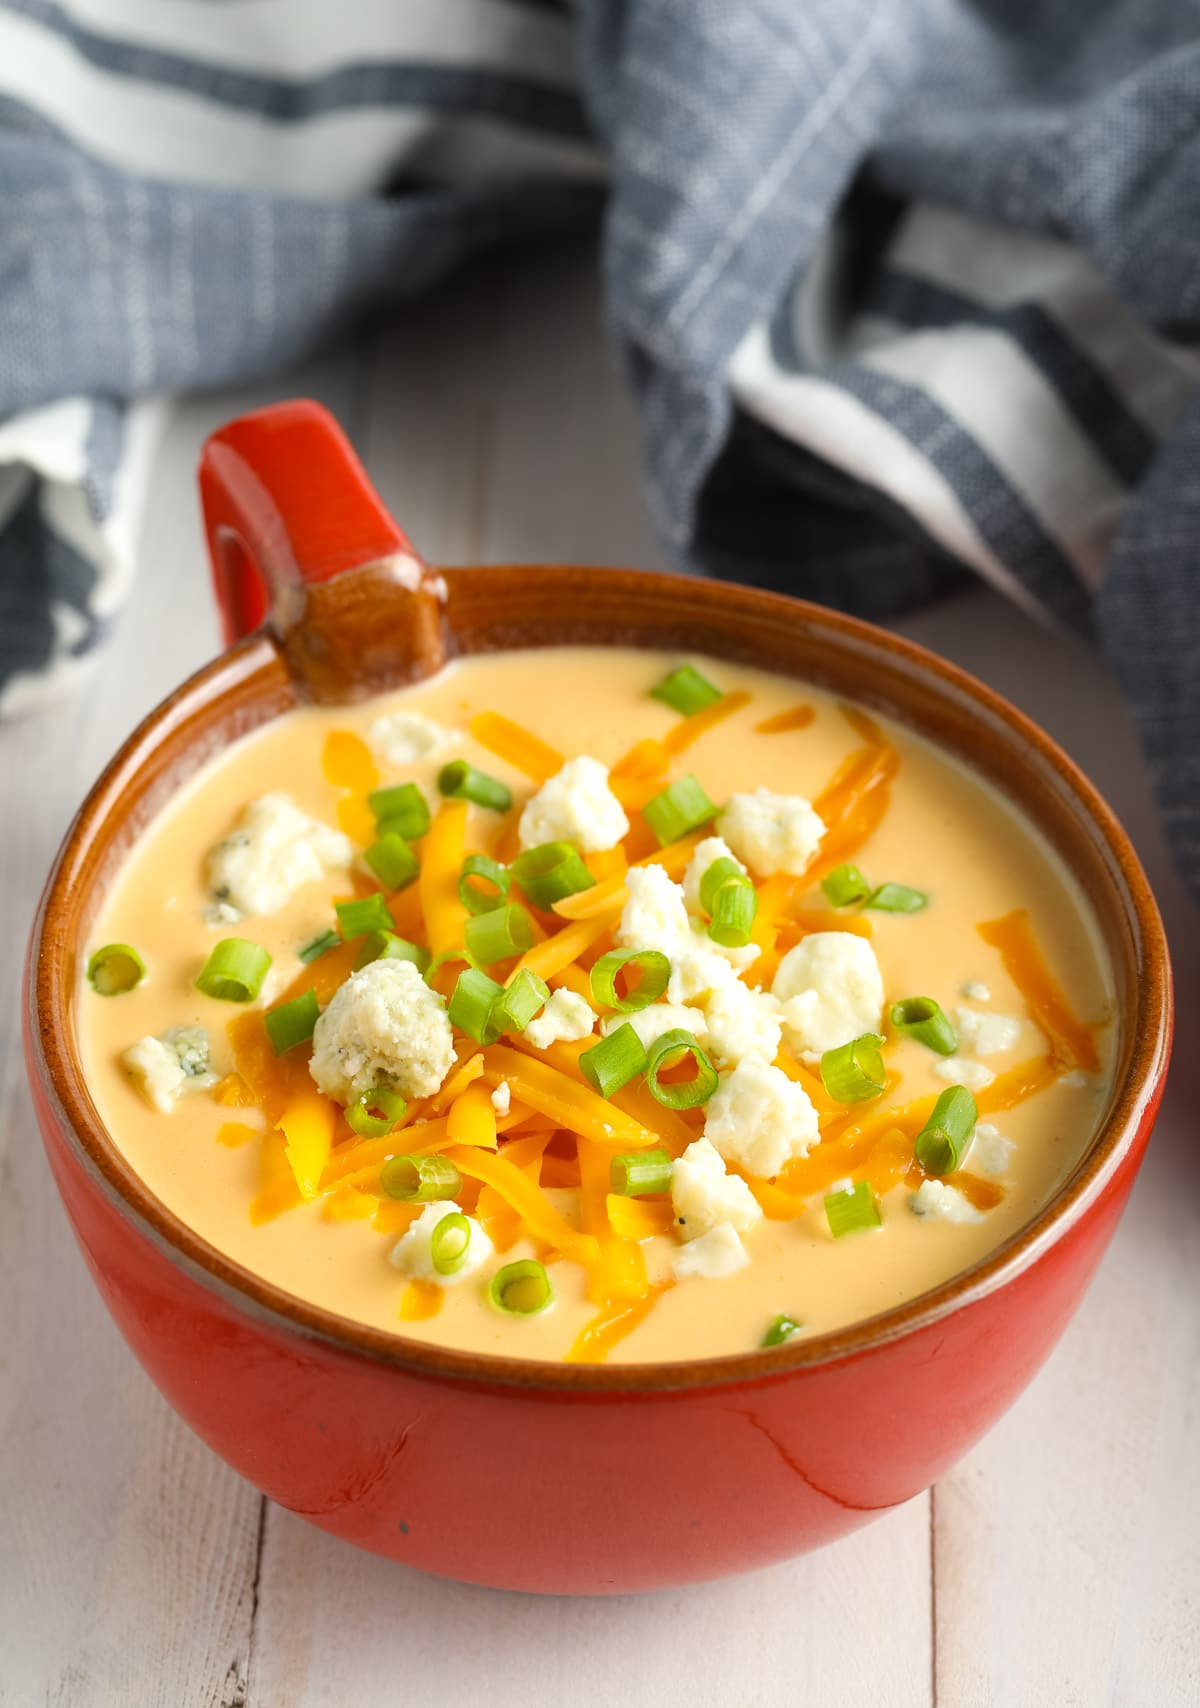 Low Carb Cauliflower Soup Recipe #ASpicyPerspective #lowcarb #keto